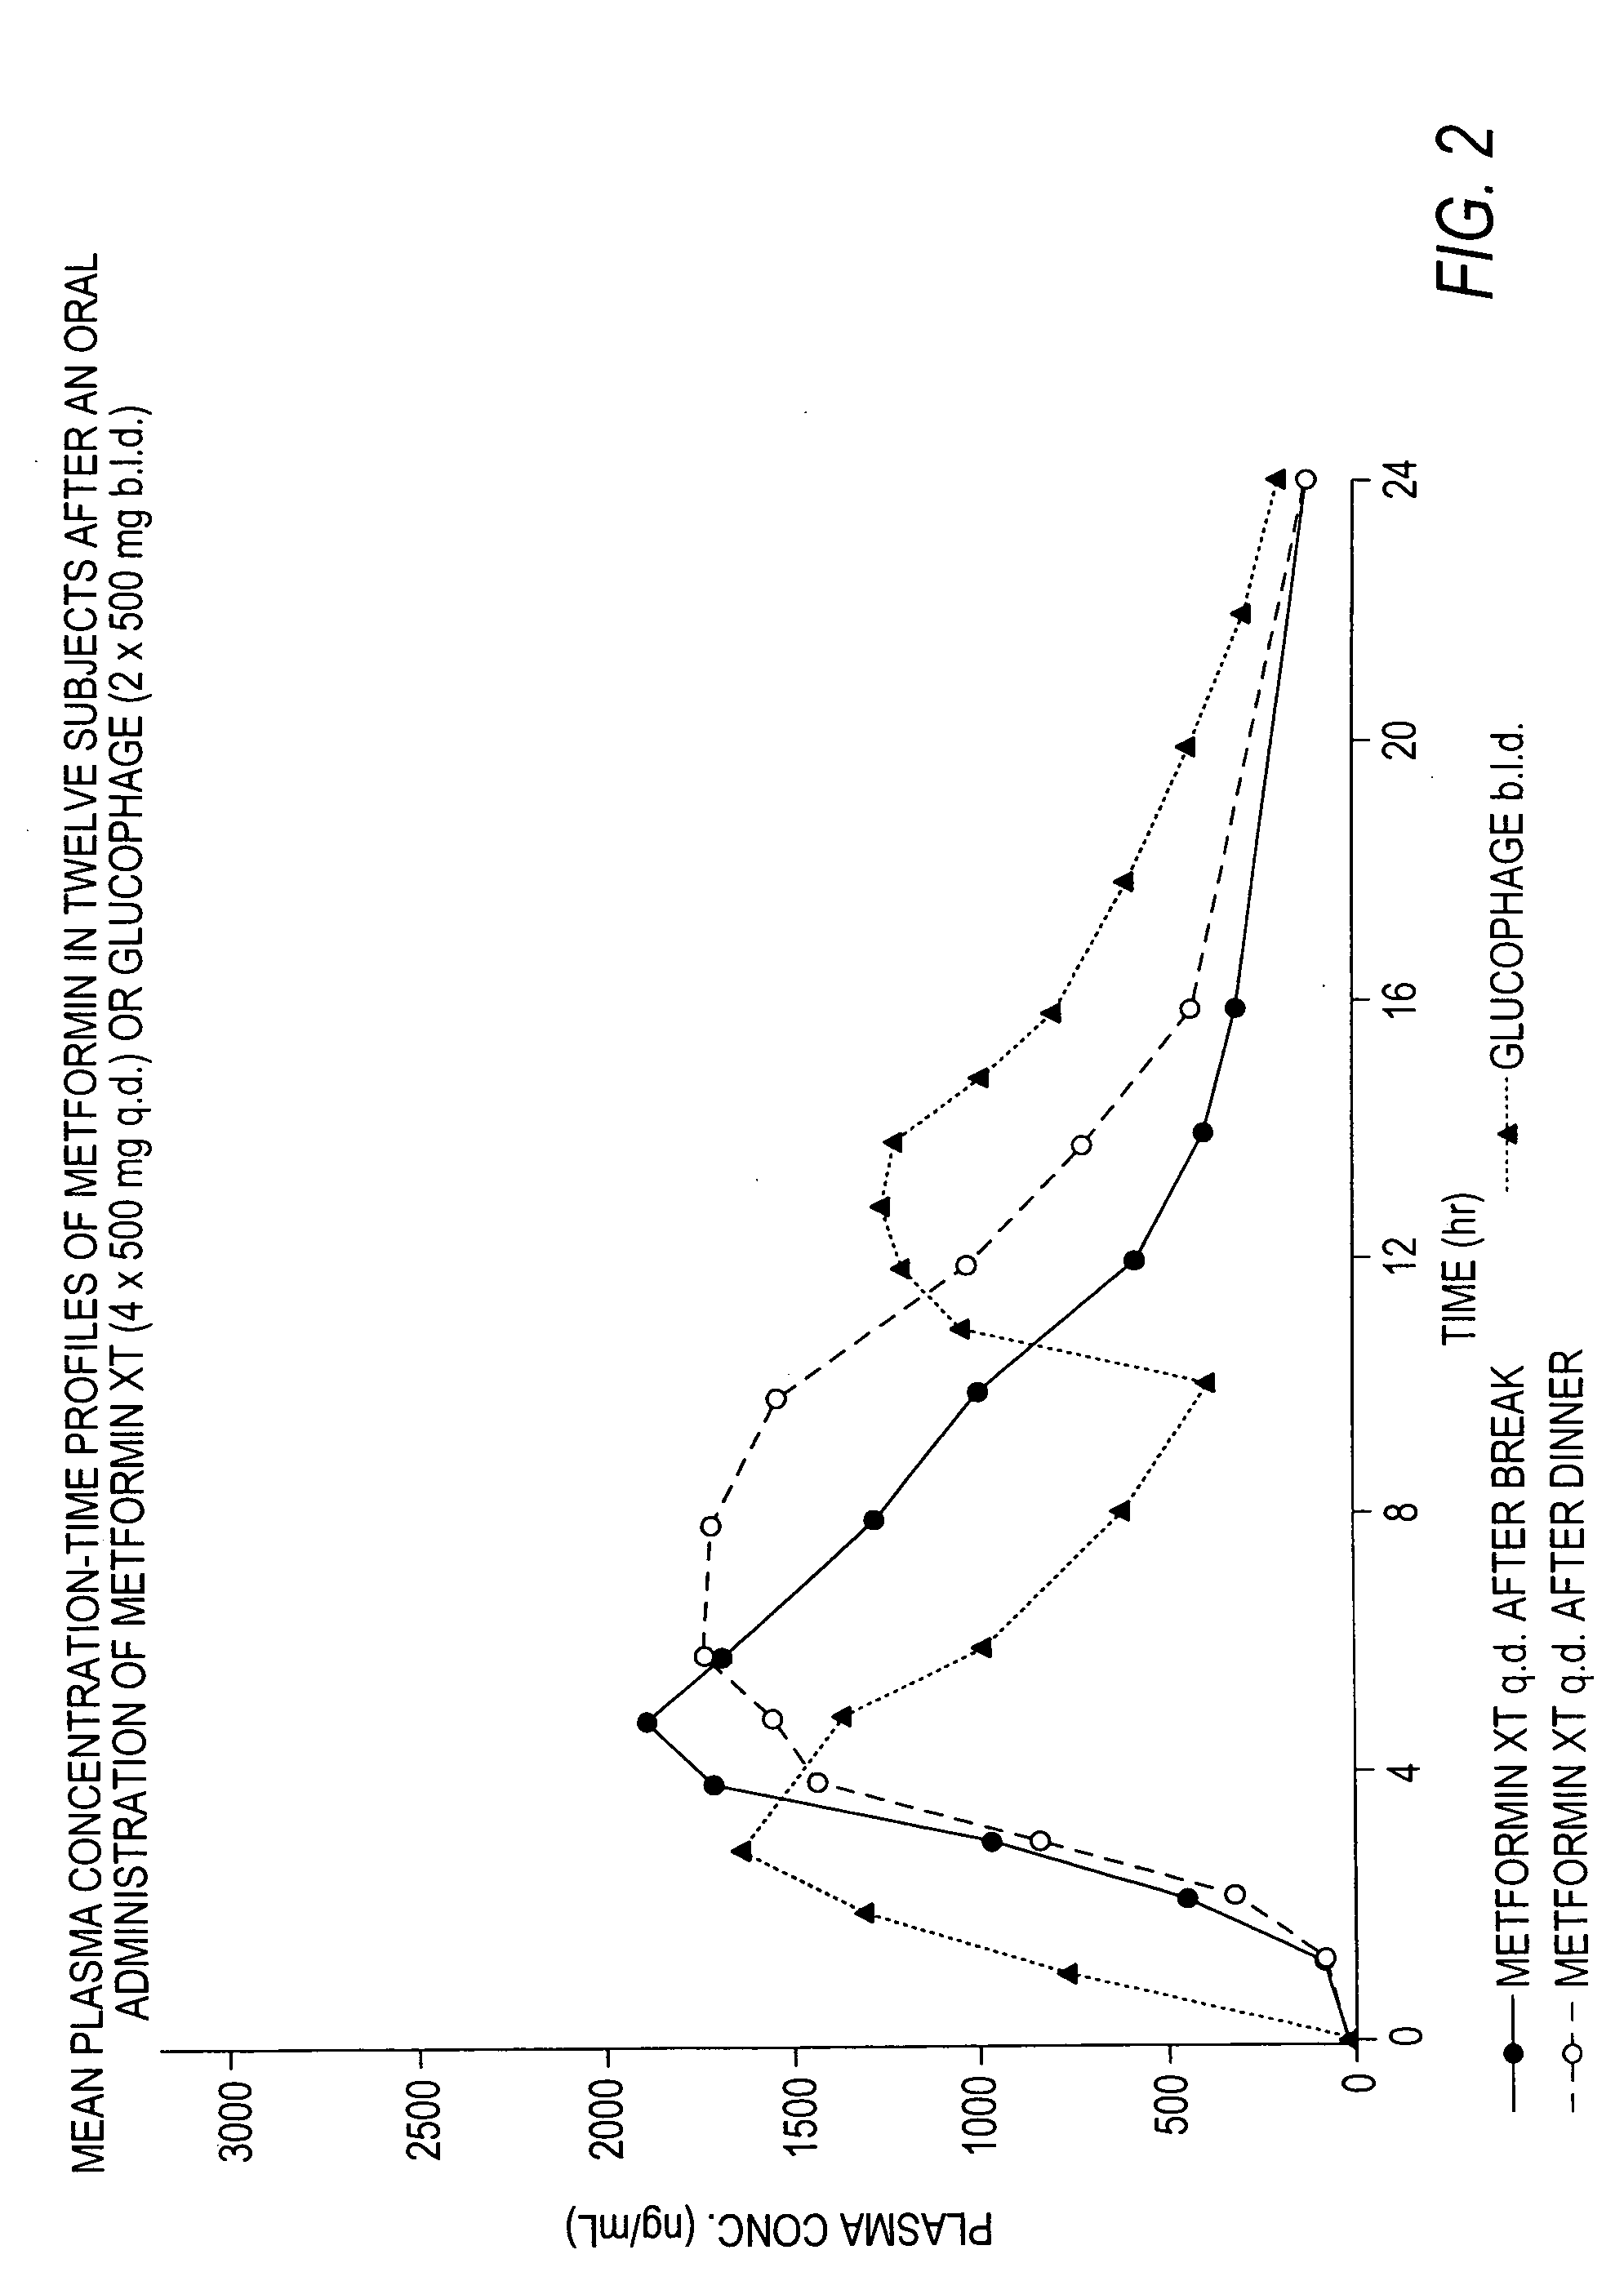 Controlled release metformin compositions